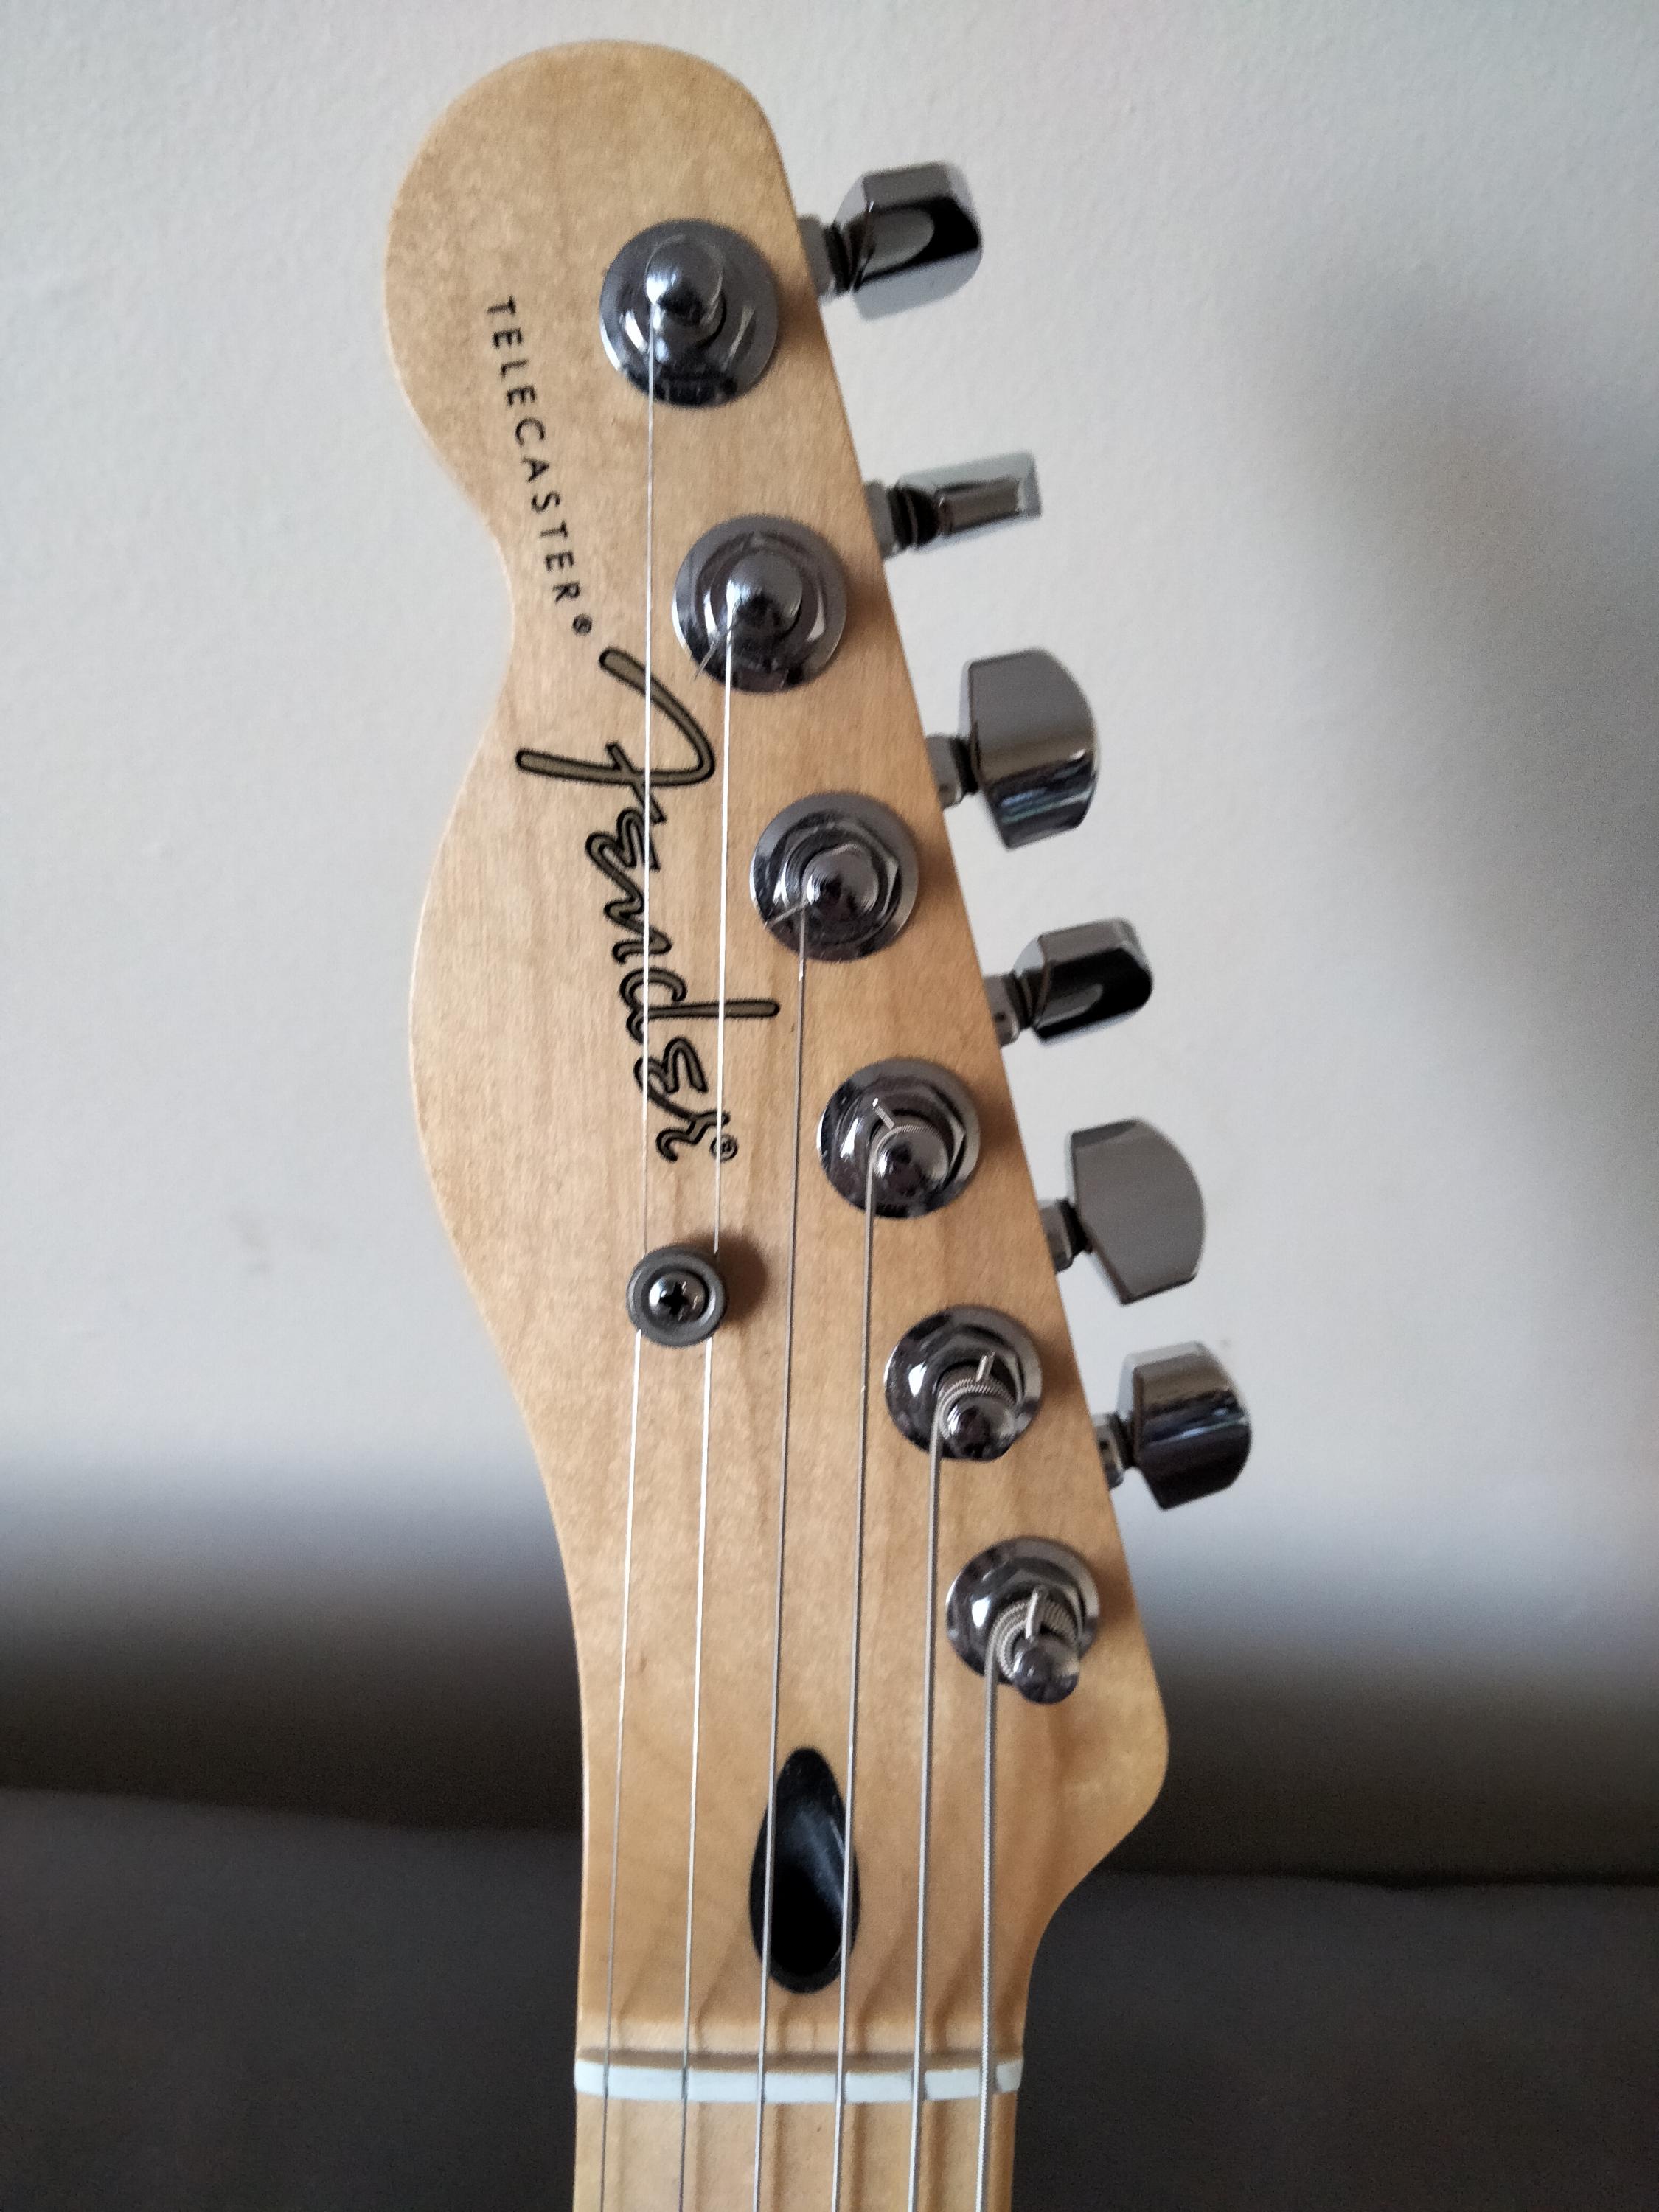 Telecaster Love Thread, No Archtops Allowed-img20220331153108-jpg